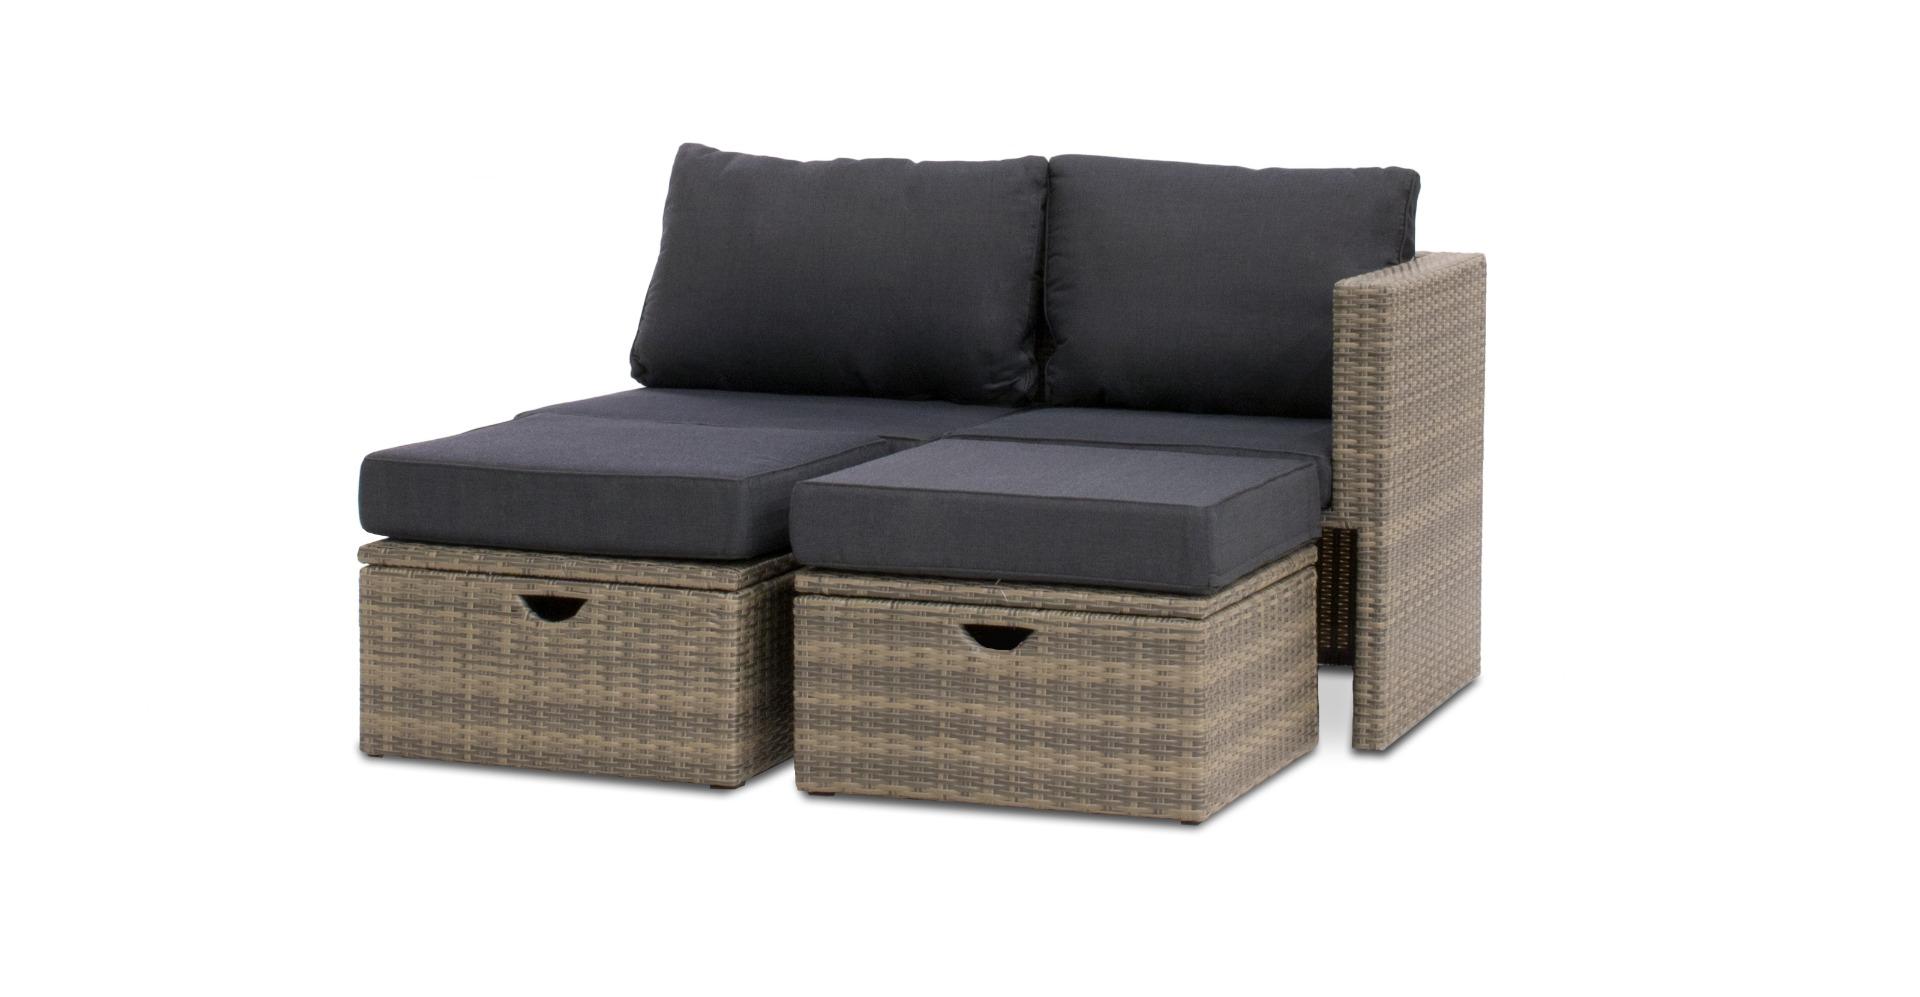 Rhodos lounge bench with footrest